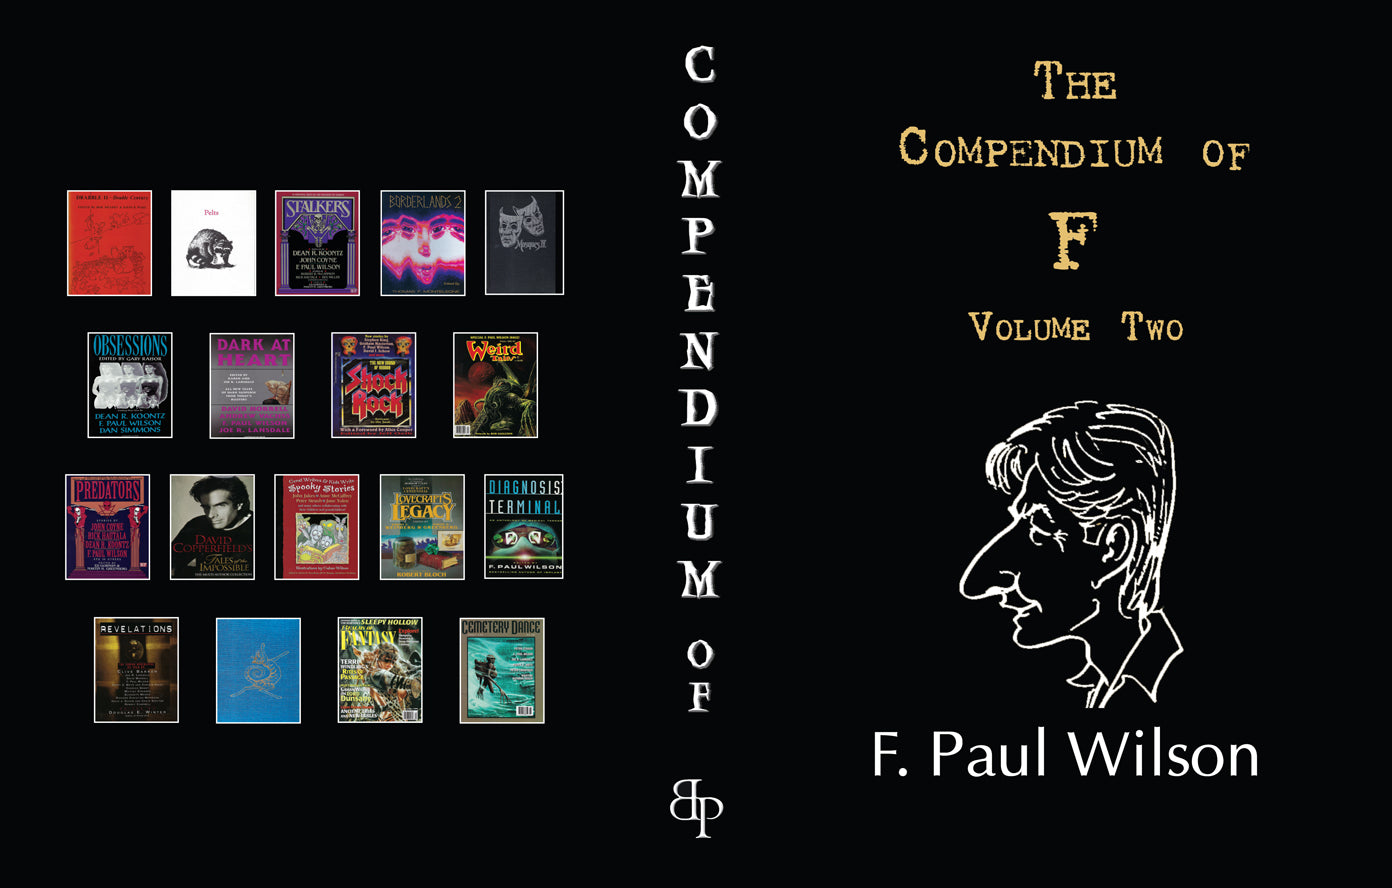 The Compendium of F: Vol. Two—The Collected Short Fiction of F. Paul Wilson (Signed Limited Hardcover)